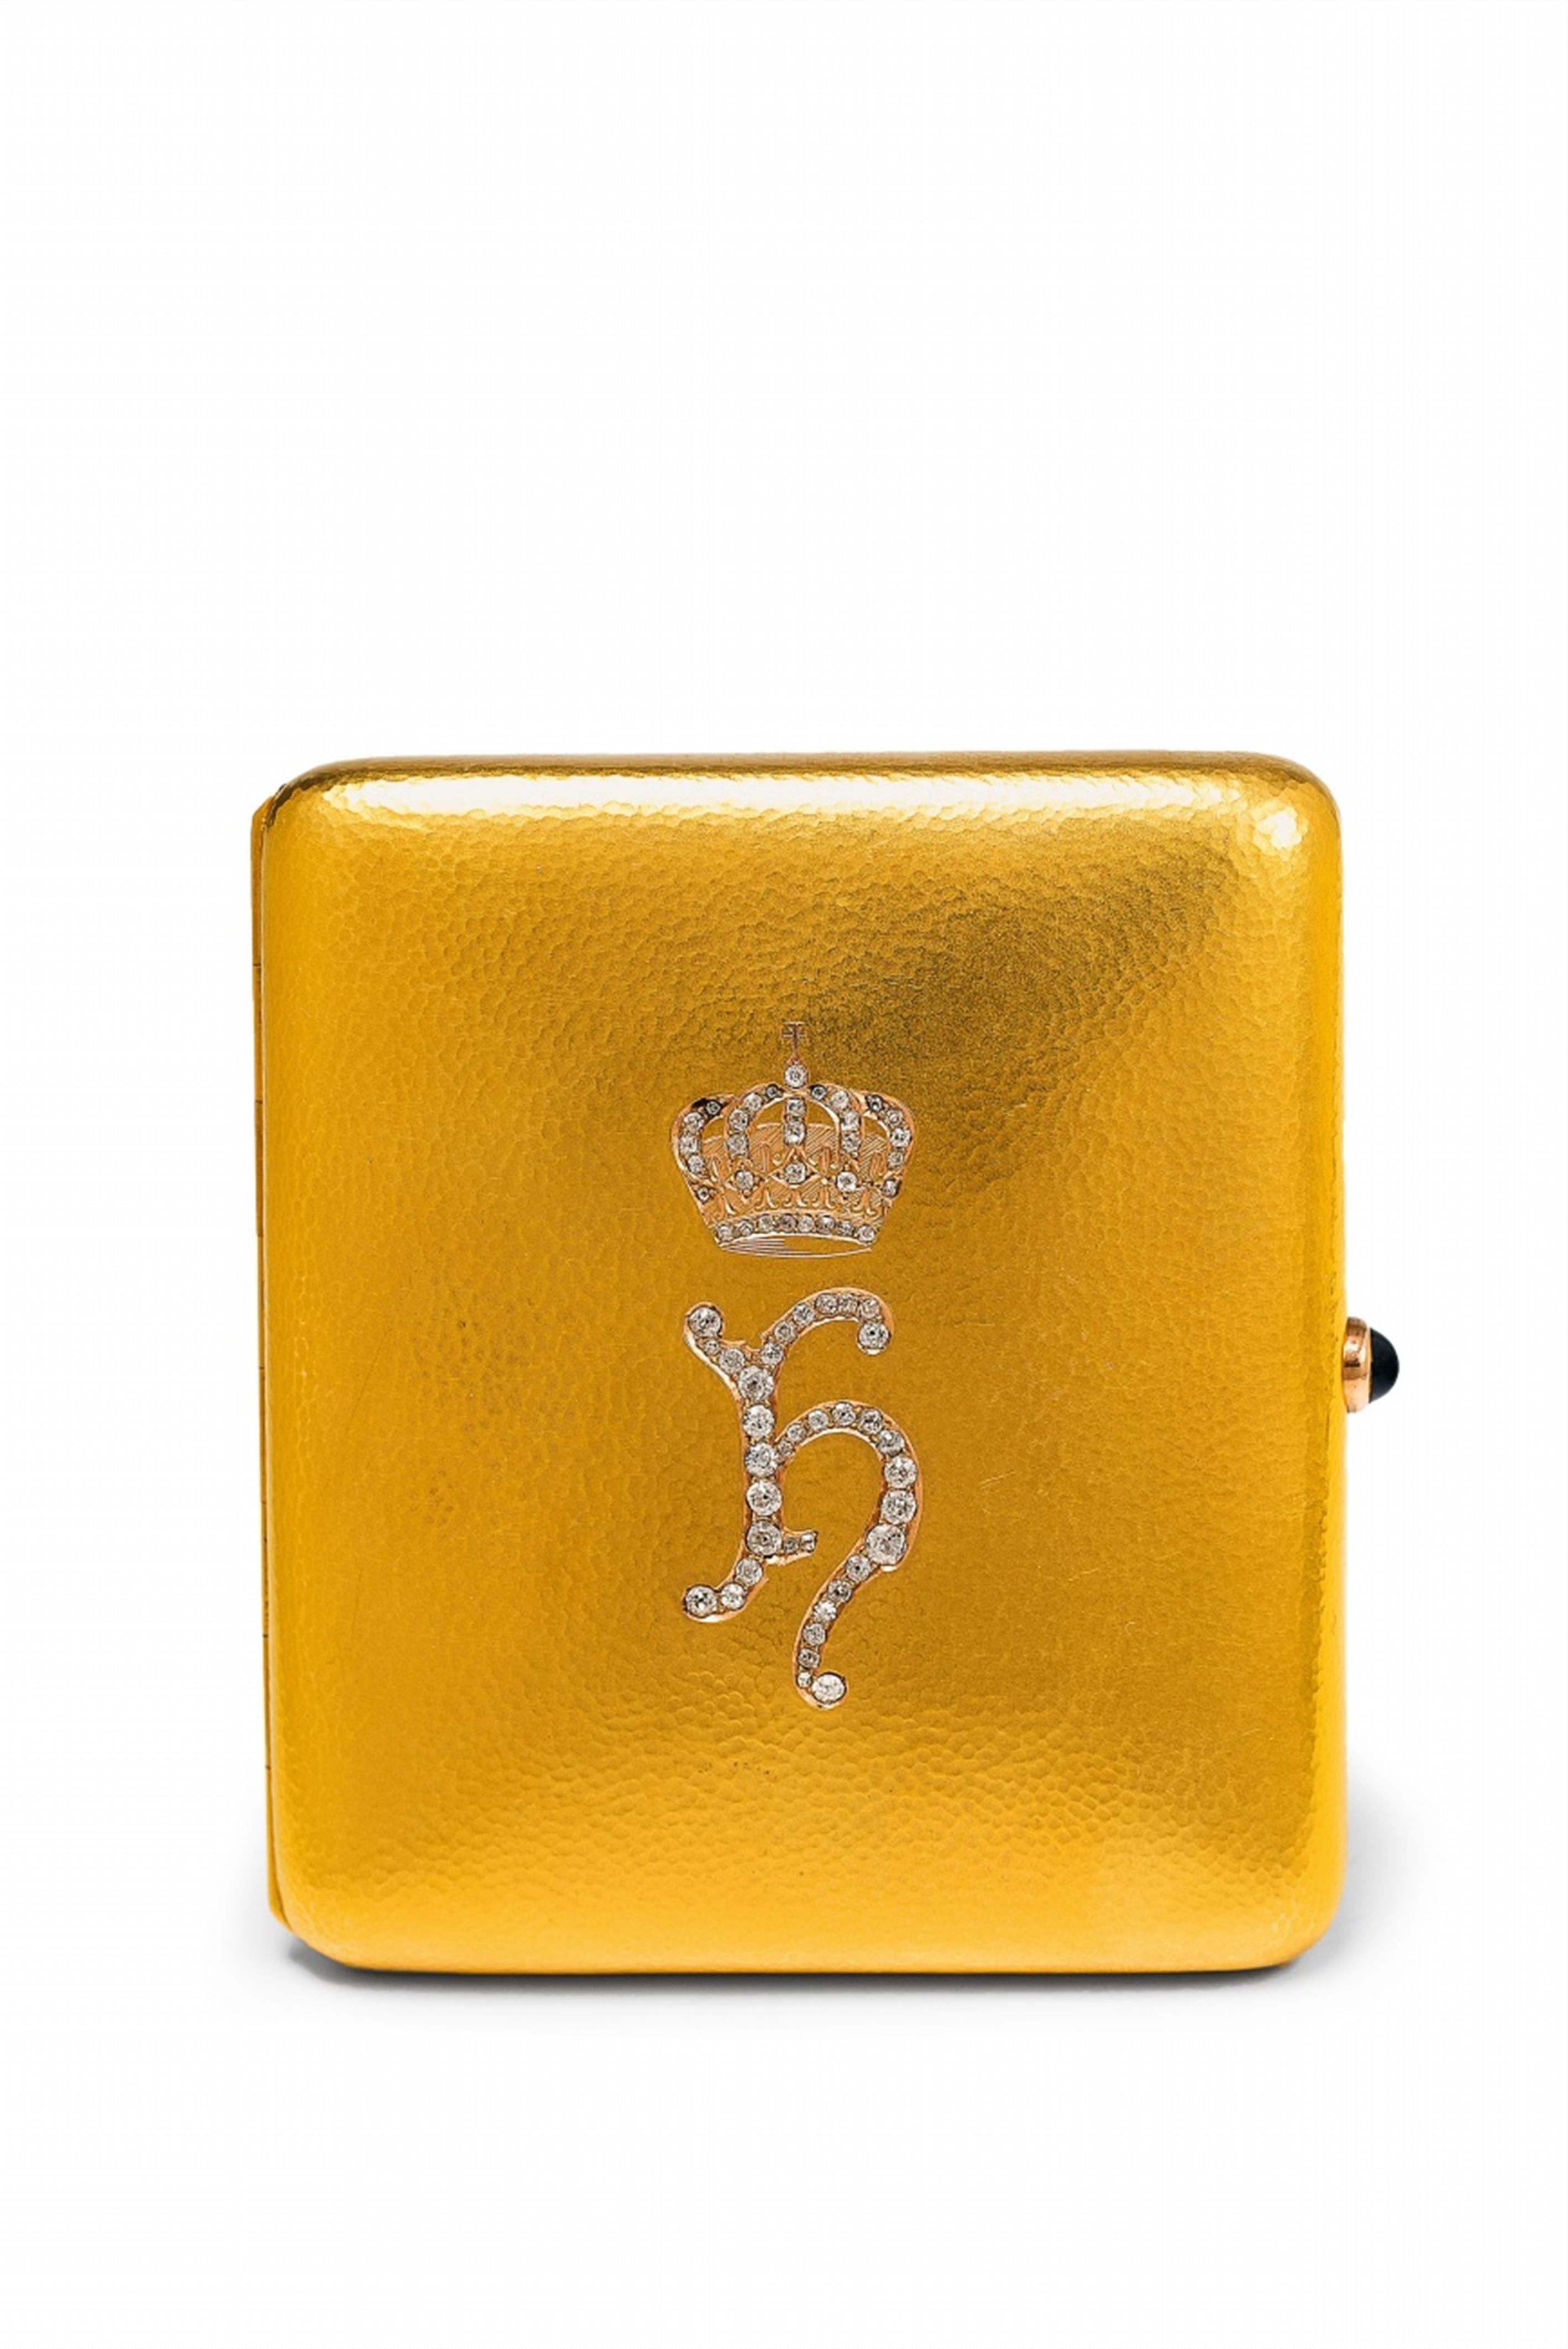 A 14k gold royal presentation cigarette case from King Haakon of Norway - image-1